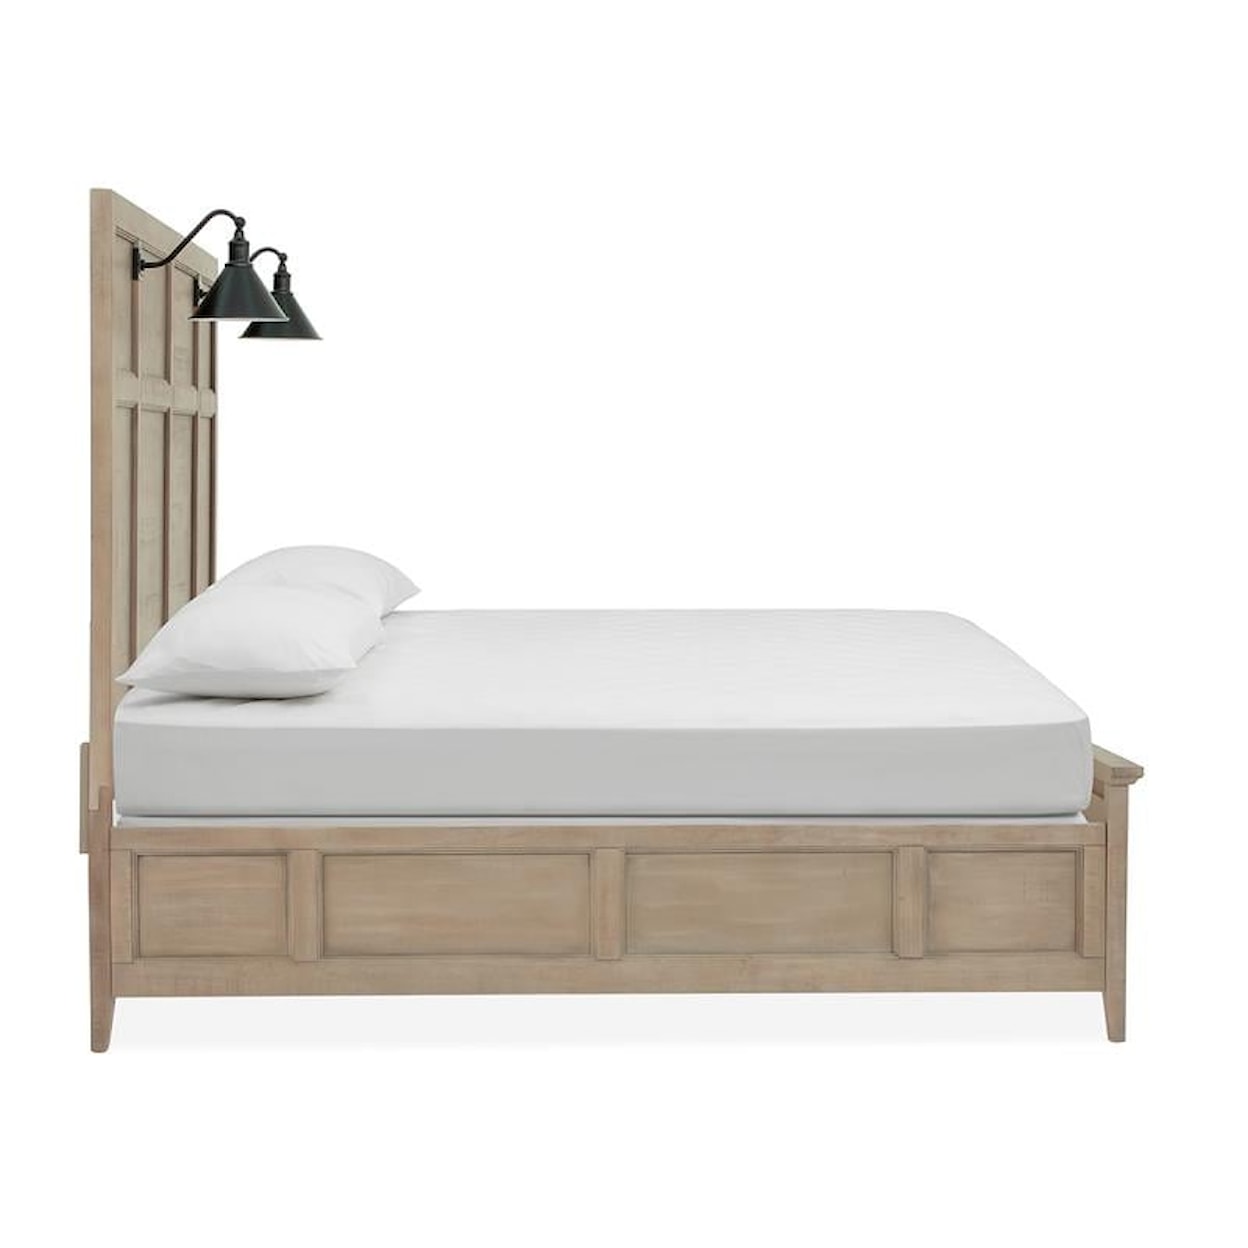 Magnussen Home Paxton Place Bedroom King Lamp Panel Bed